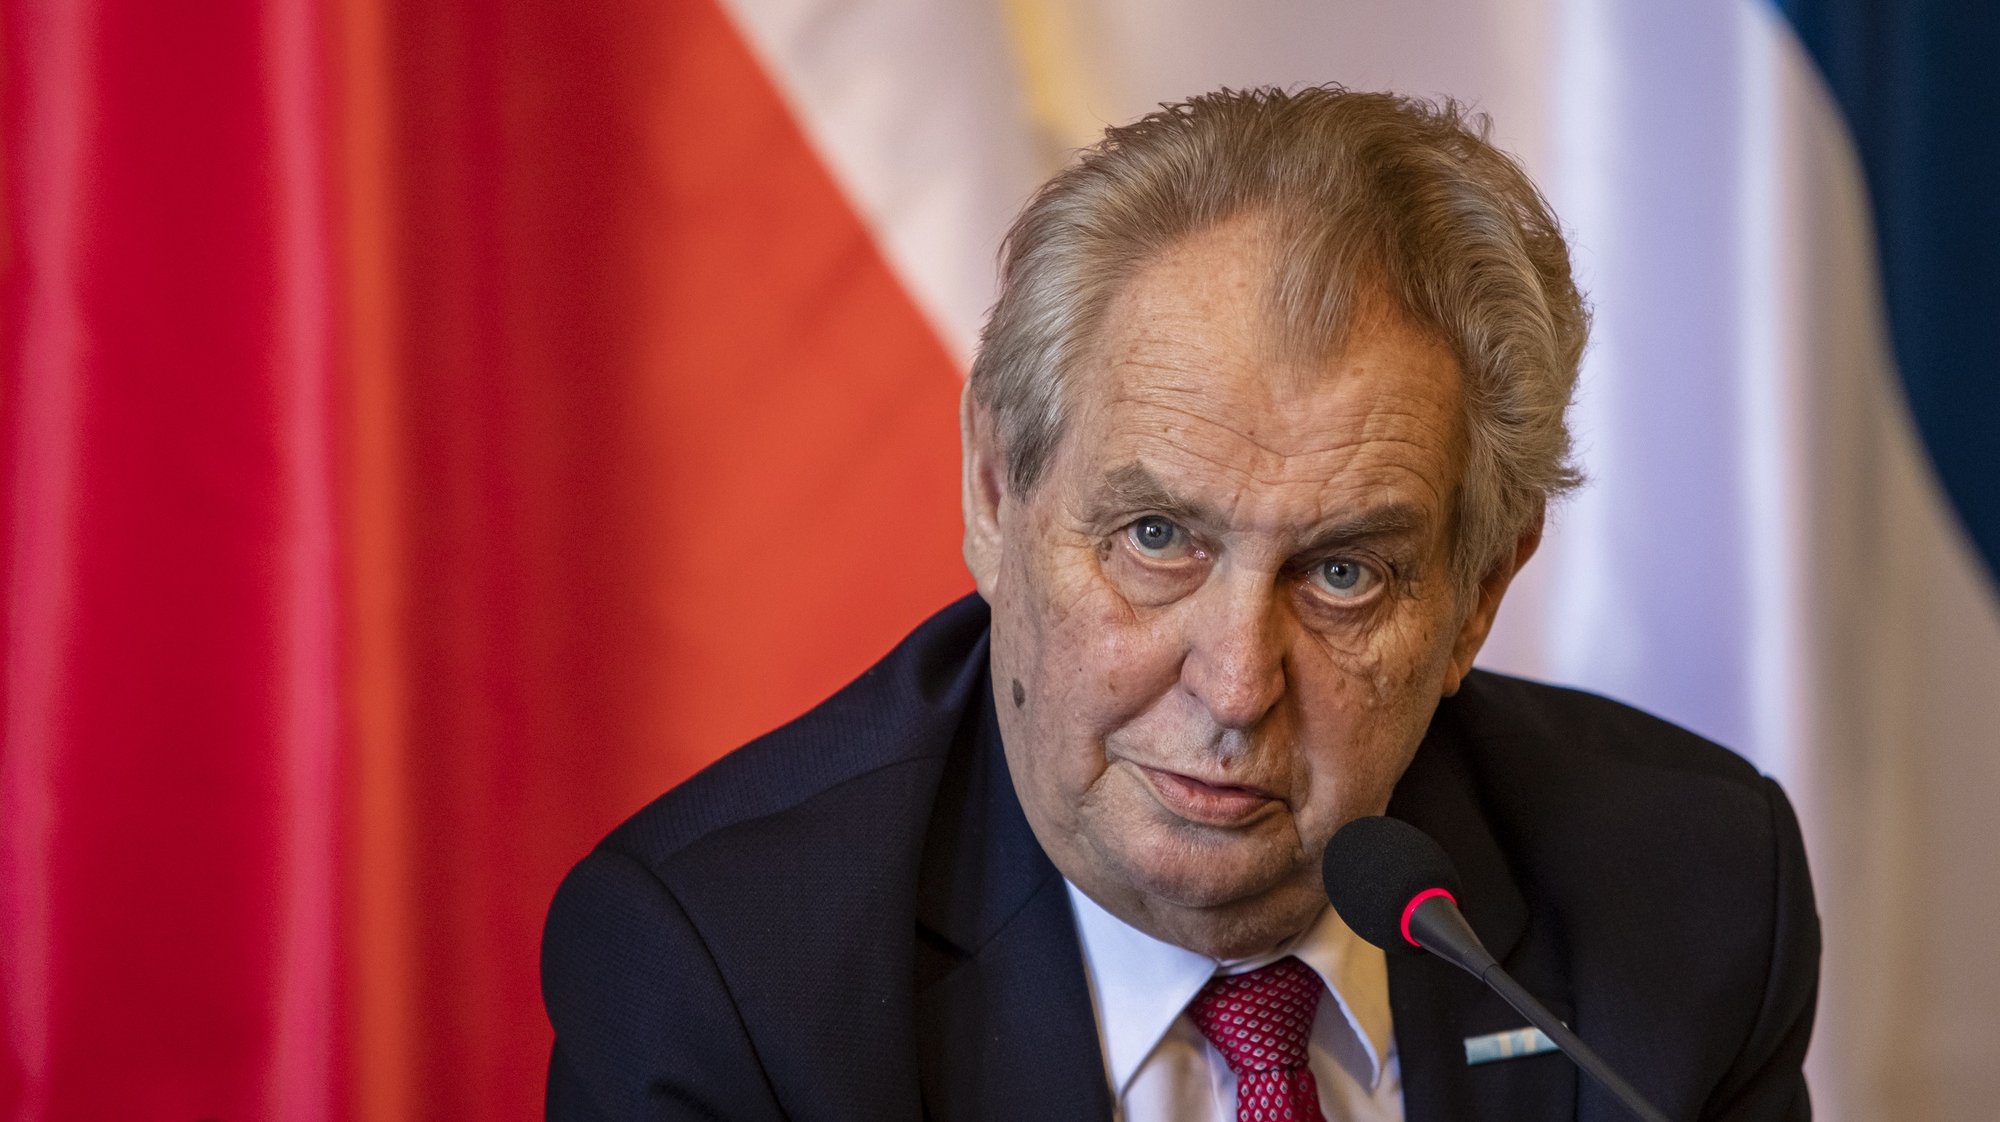 epa09208385 Czech President Milos Zeman talks to media at press conference after meeting with Serbian President Aleksandar Vucic at Prague Castle in Prague, Czech Republic, 18 May 2021. Vucic is on three-day state visit to Czech Republic.  EPA/MARTIN DIVISEK